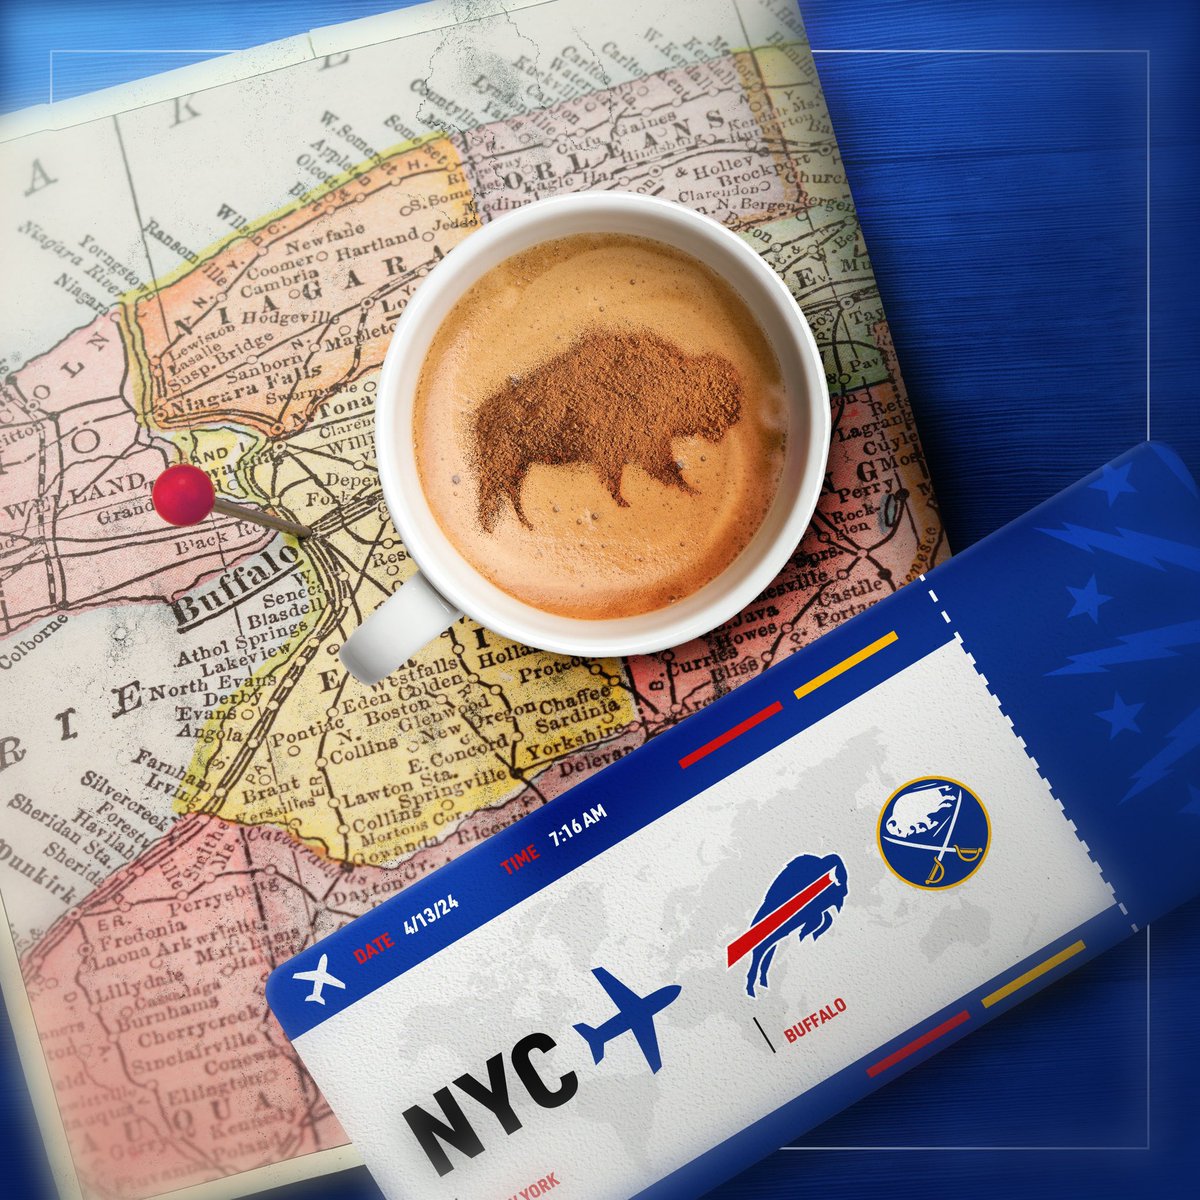 New pic, new header…I’m home! Can’t wait to get to work for these two great teams. Let’s get it Buffalo!